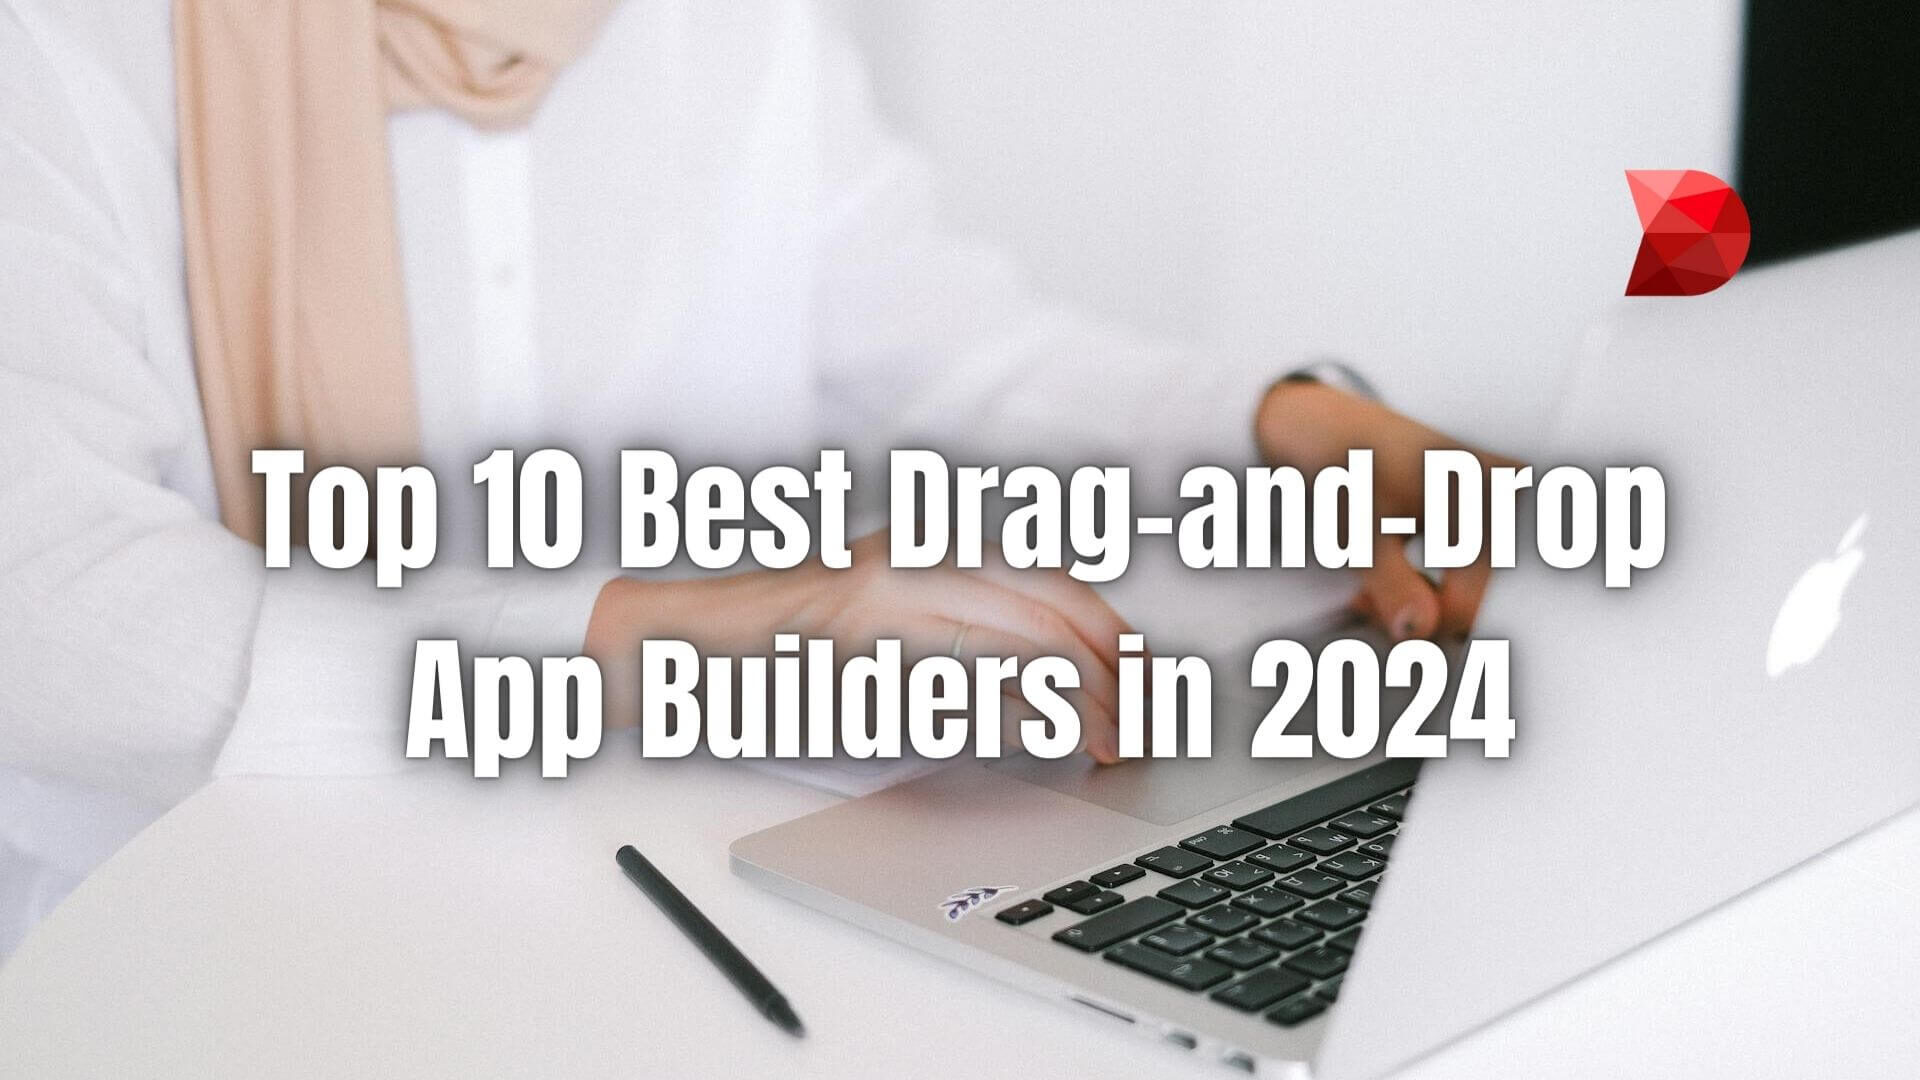 Maximize your app-building potential in 2024! Click here to uncover the top 10 drag-and-drop app builder of 2024 in this comprehensive guide.